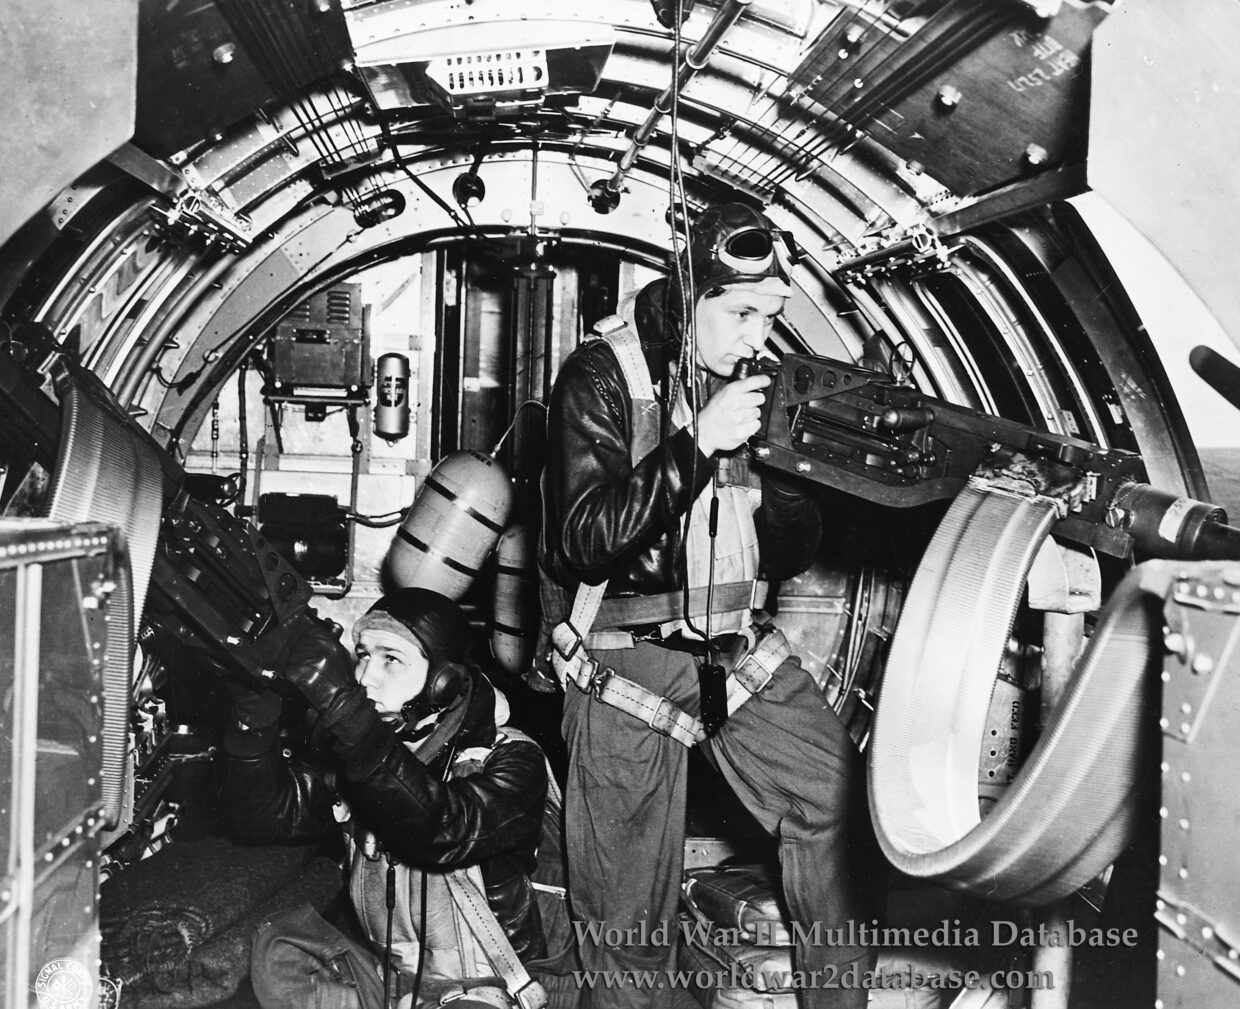 B-17 Flying Fortress “Invasion 2nd“ of 91st Bomb Group